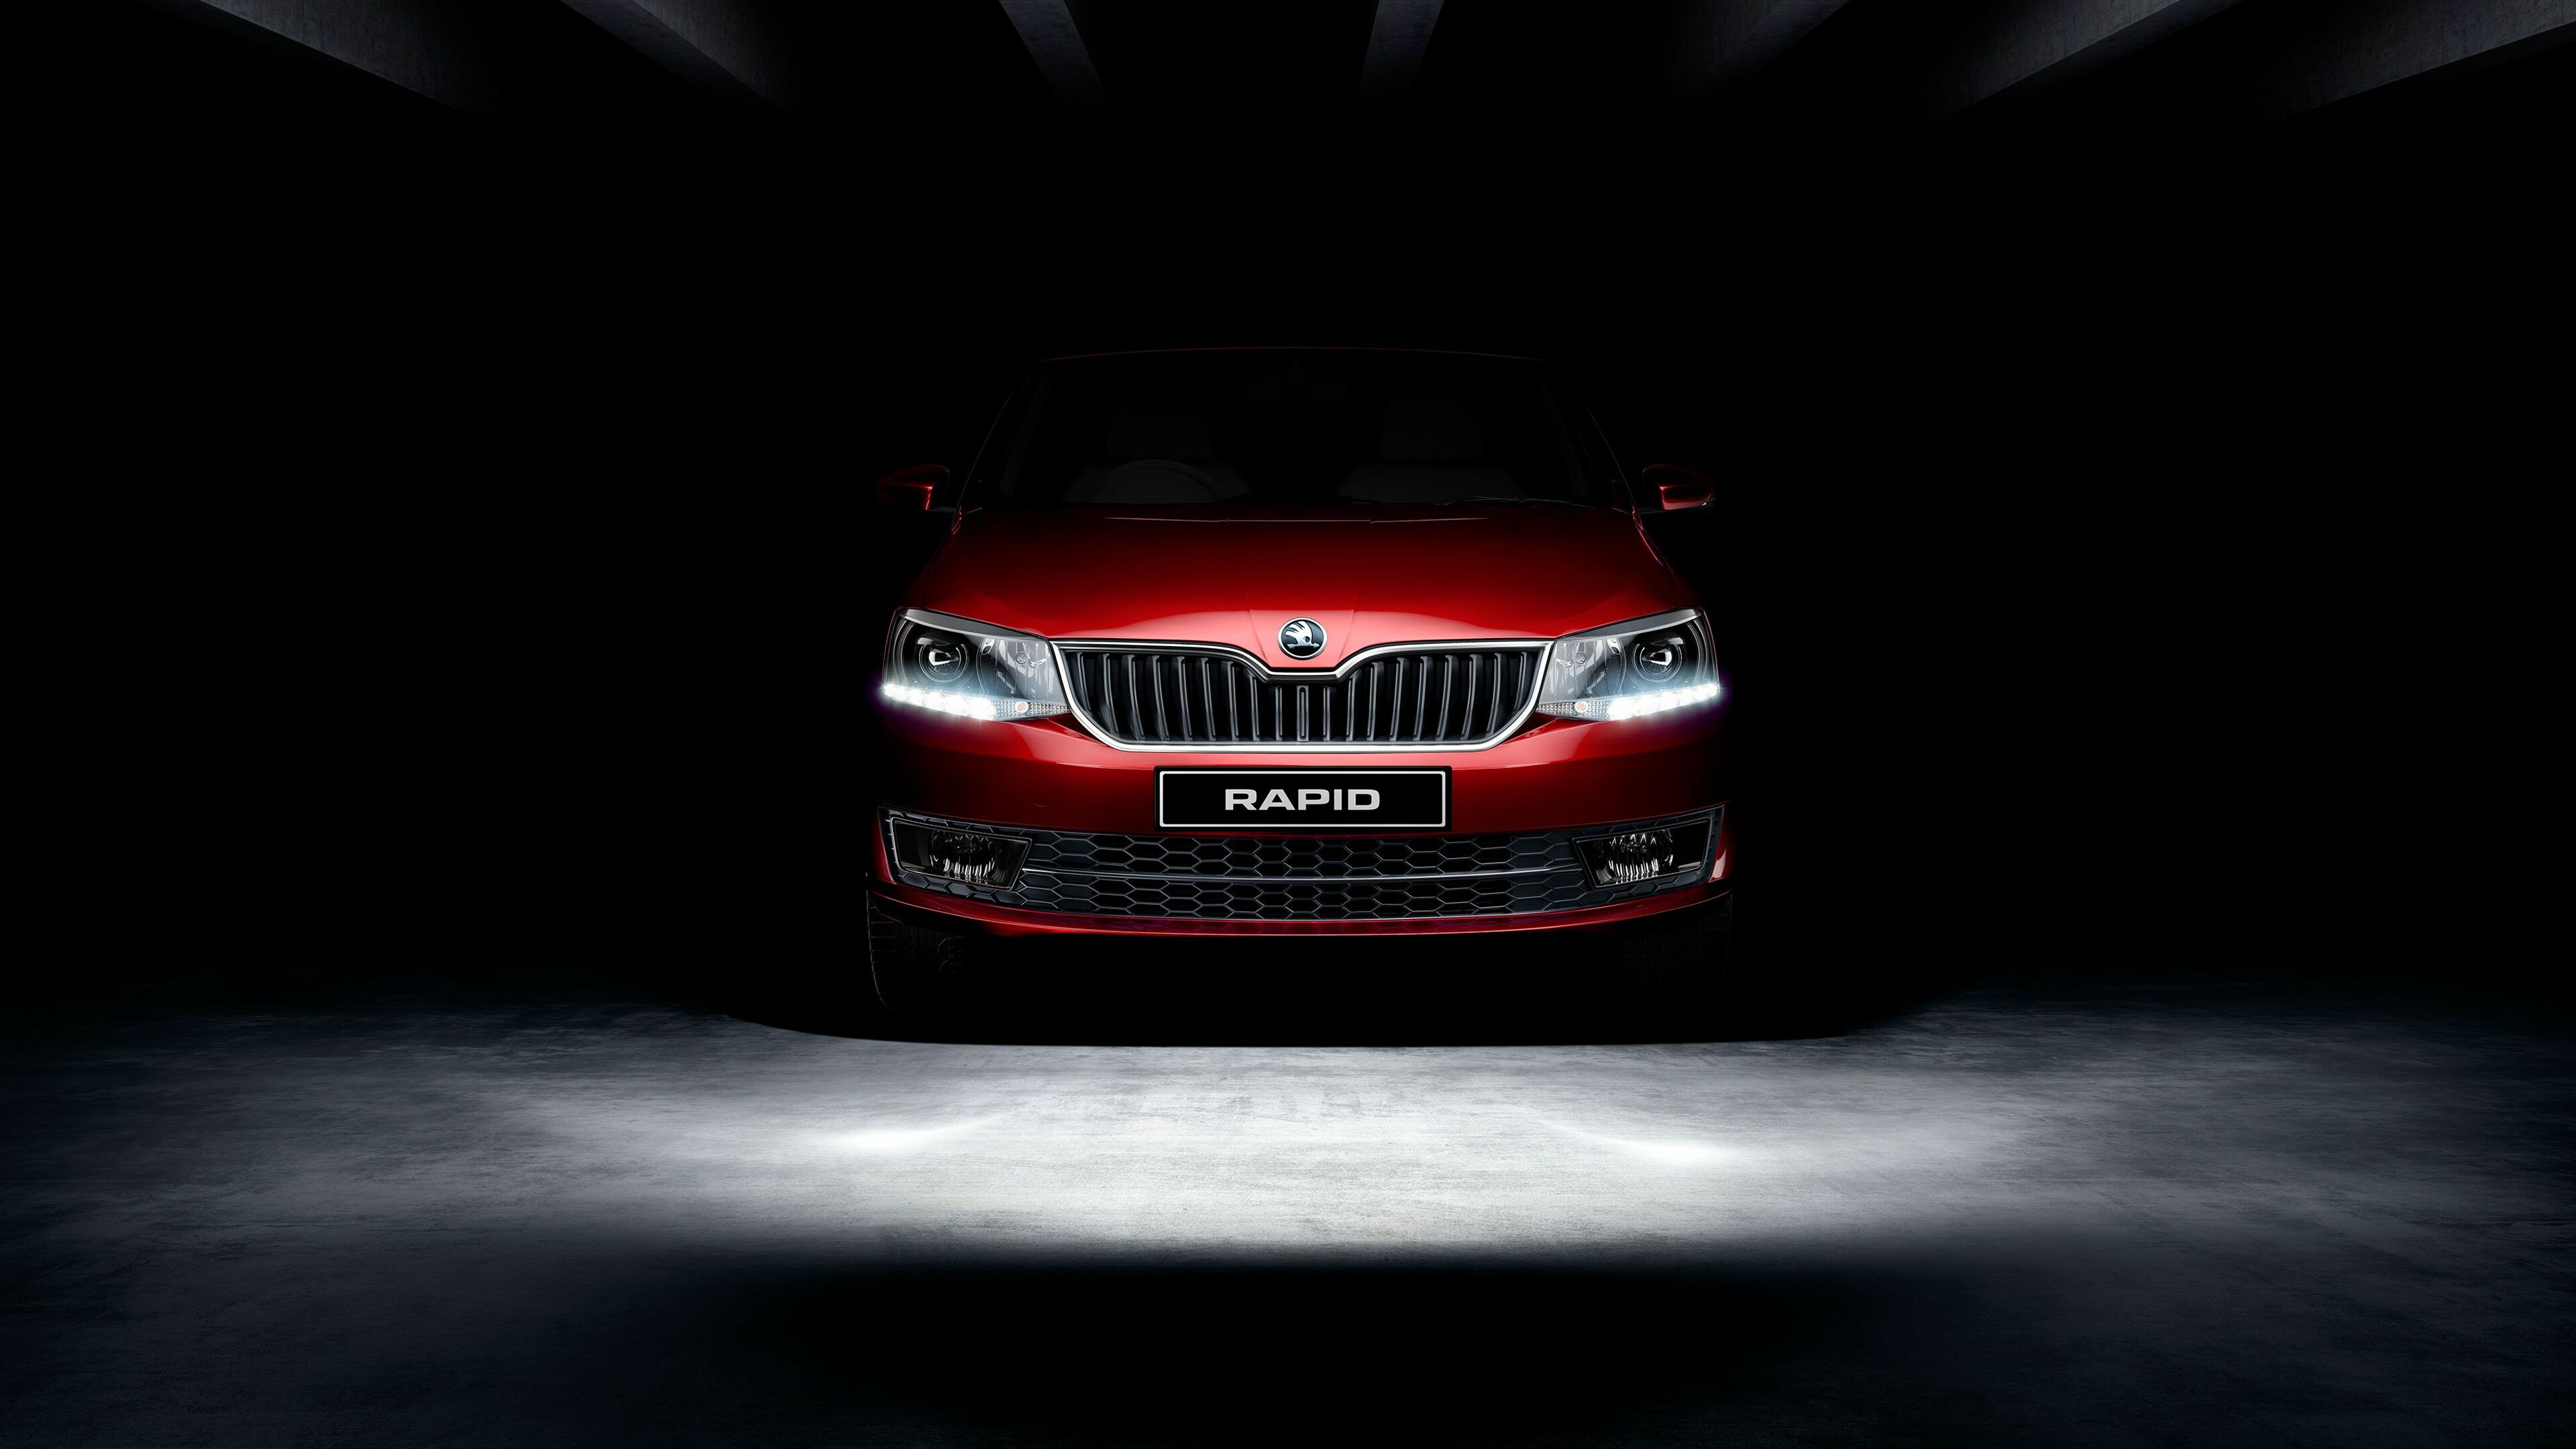 Skoda: Rapid, A range of small family car models produced by the Czech manufacturer. 3840x2160 4K Wallpaper.